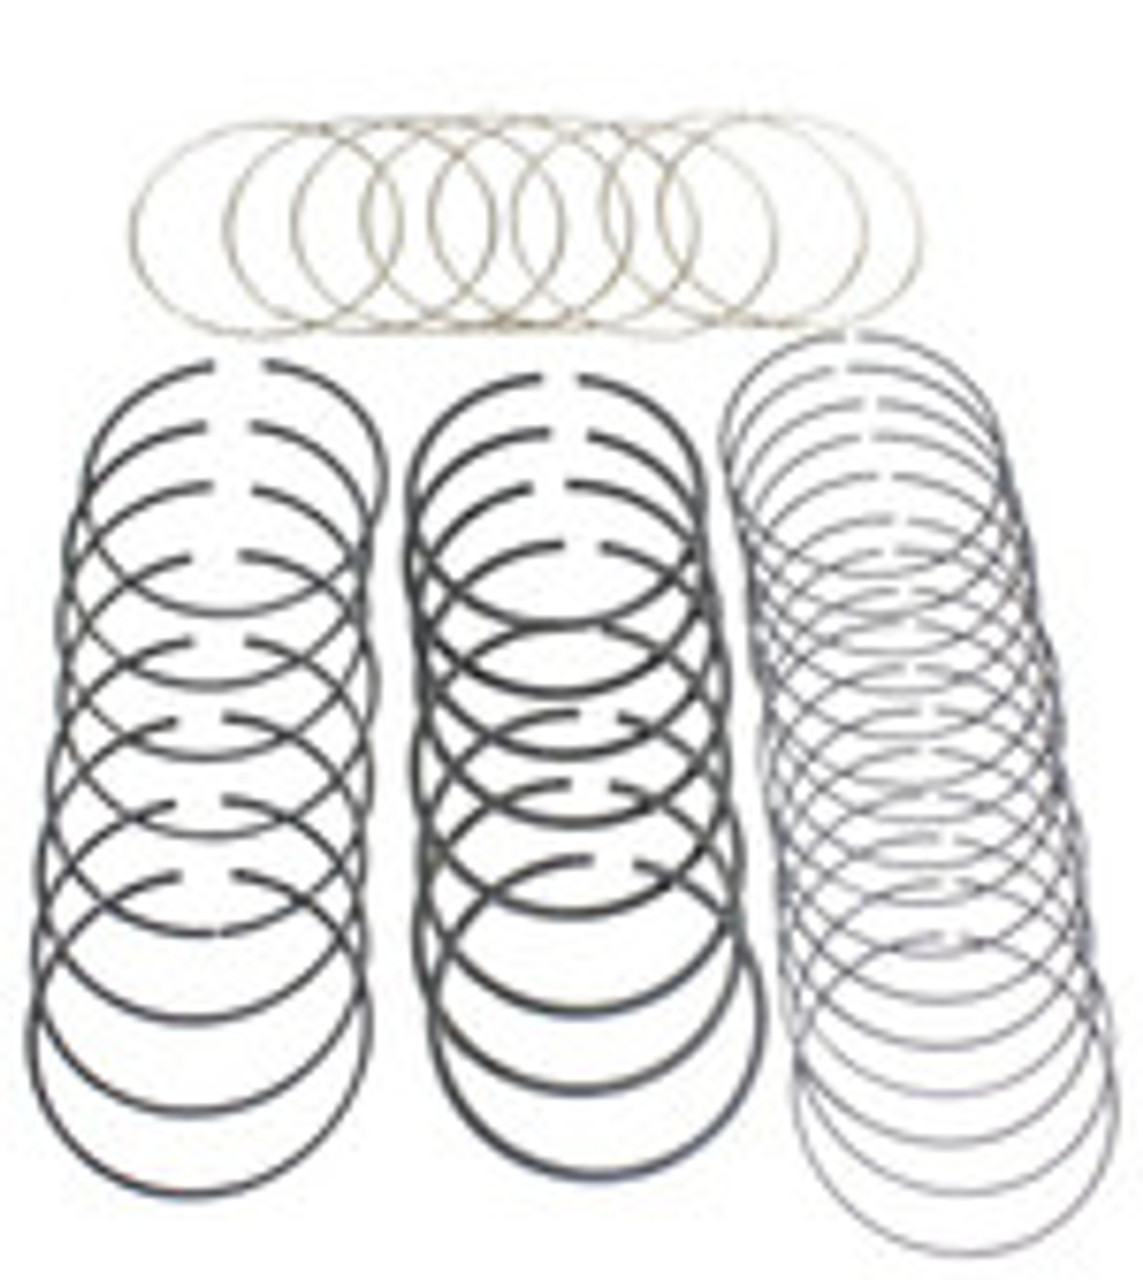 Piston Ring Set - 2017 Ford Expedition 3.5L Engine Parts # PR4198ZE27